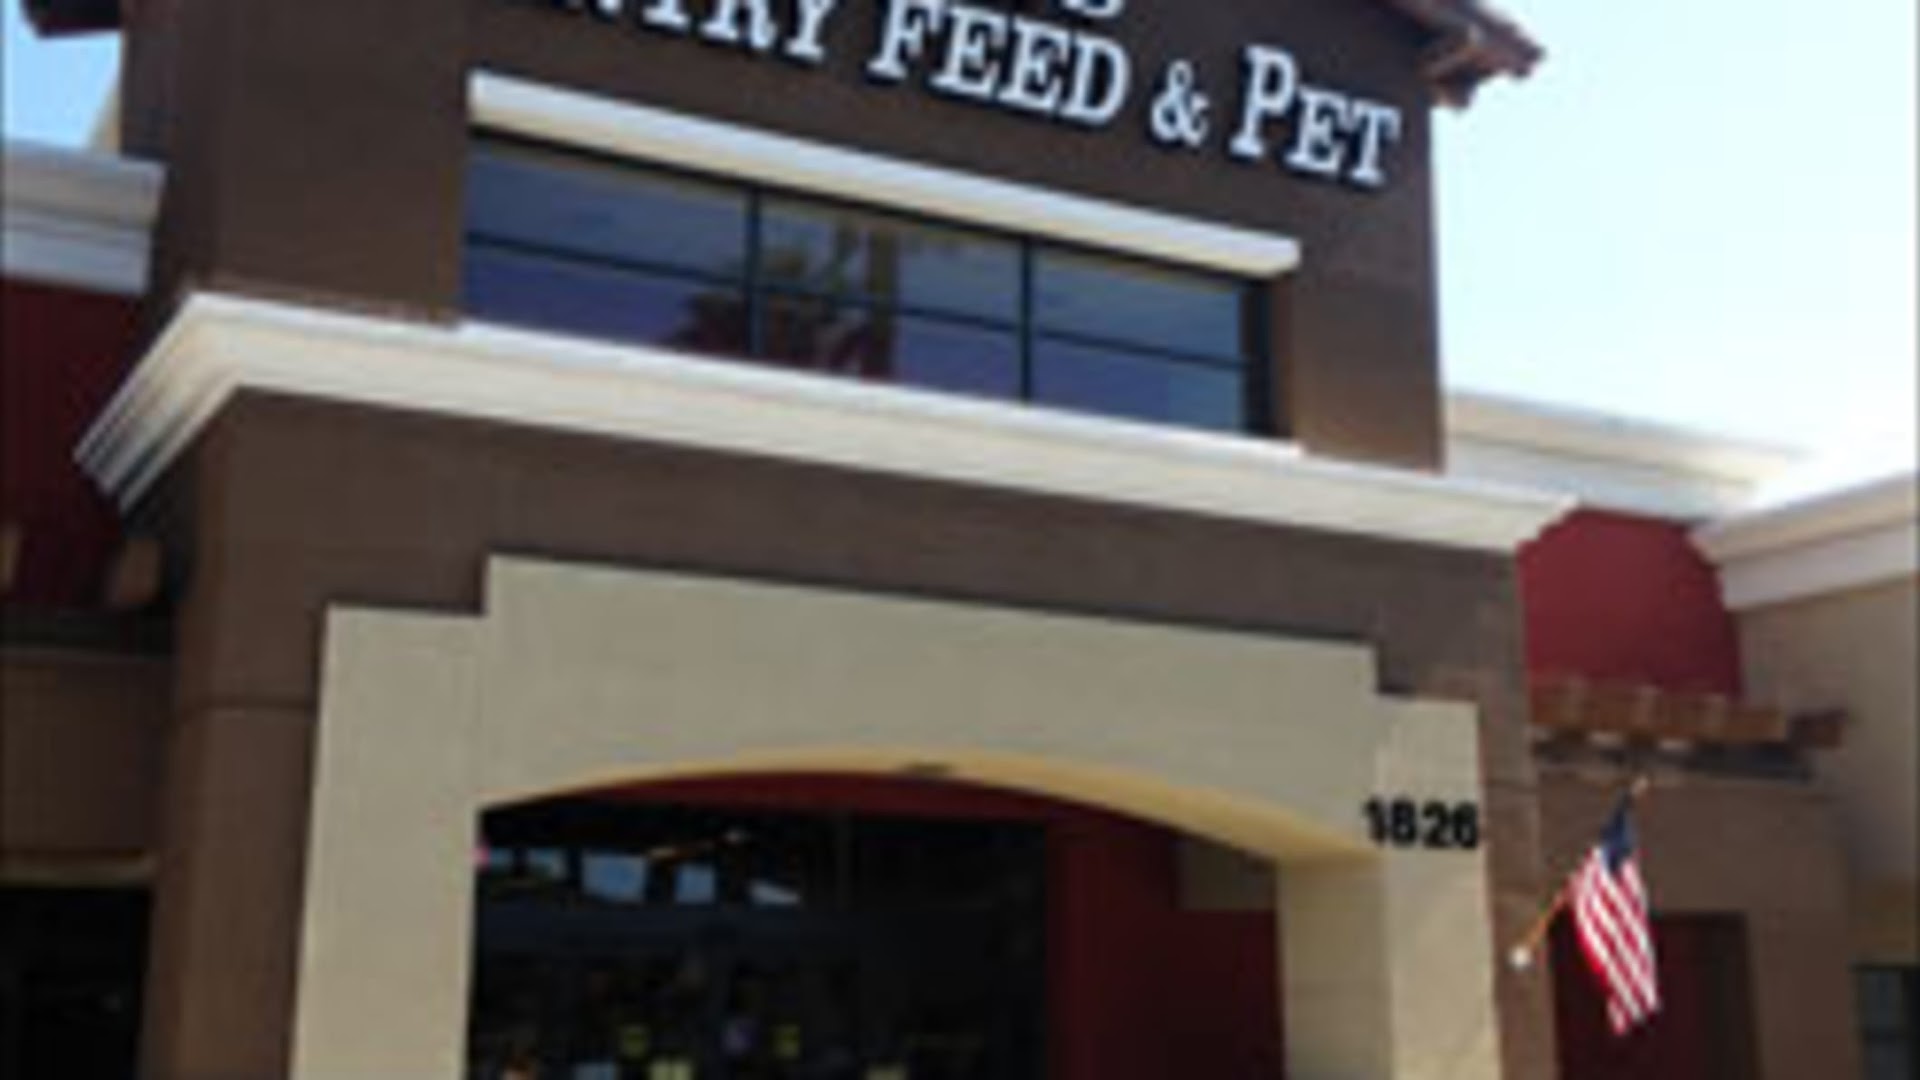 Theresa's Country Feed & Pet